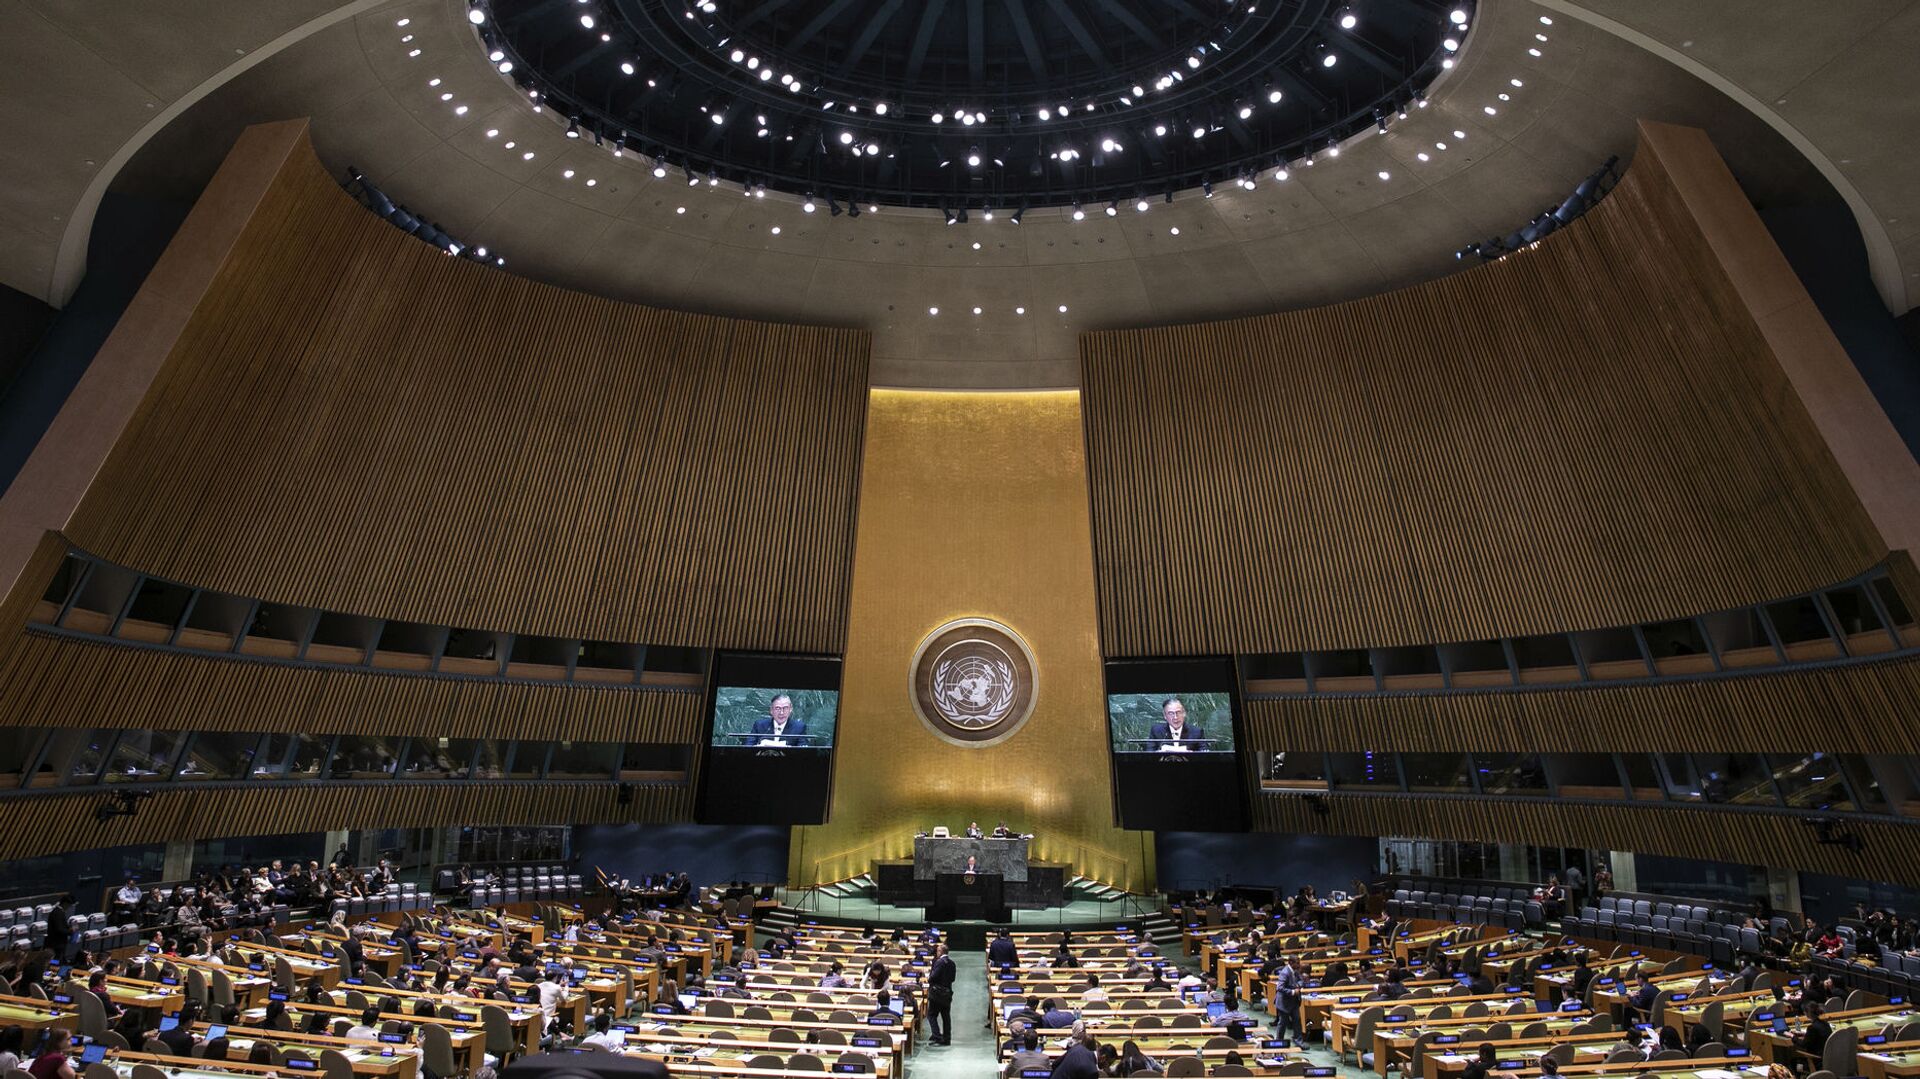 Philippines' Foreign Secretary Teodoro Locsin Jr. addresses the 74th session of the United Nations General Assembly at the U.N. headquarters Saturday, Sept. 28, 2019. - Sputnik International, 1920, 25.06.2023